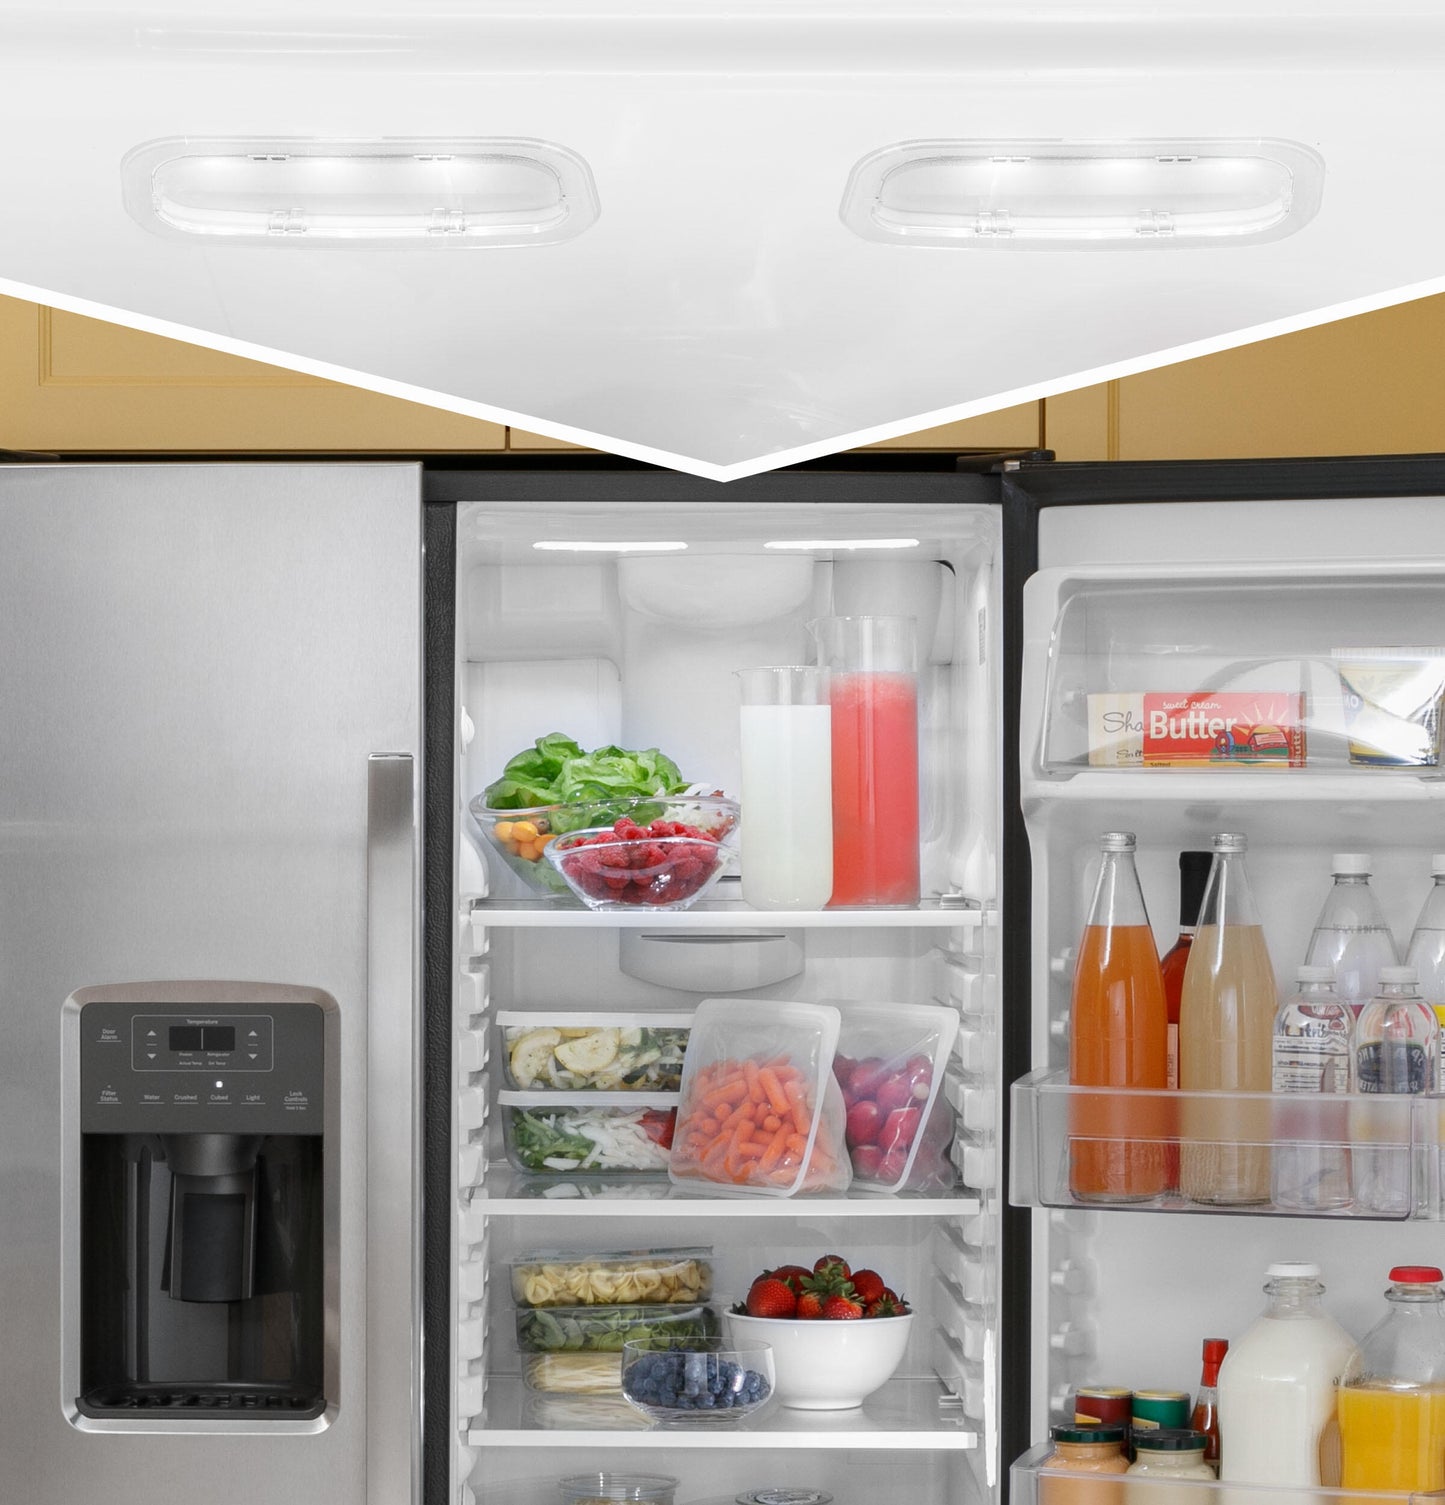 Ge Appliances GSE23GGPWW Ge® Energy Star® 23.0 Cu. Ft. Side-By-Side Refrigerator